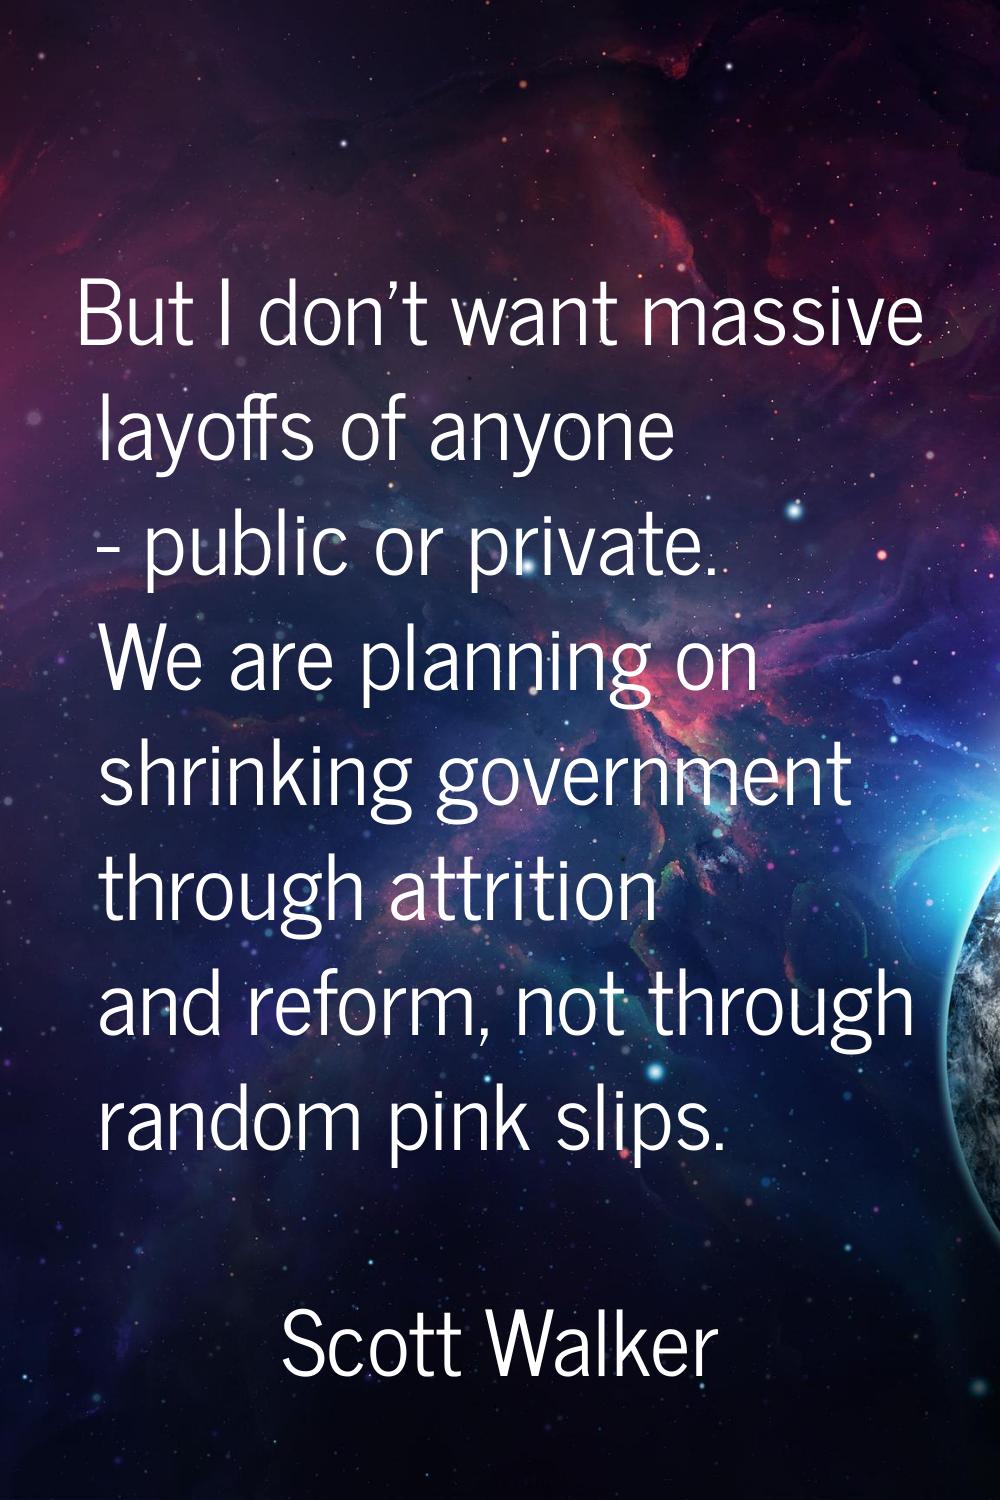 But I don't want massive layoffs of anyone - public or private. We are planning on shrinking govern